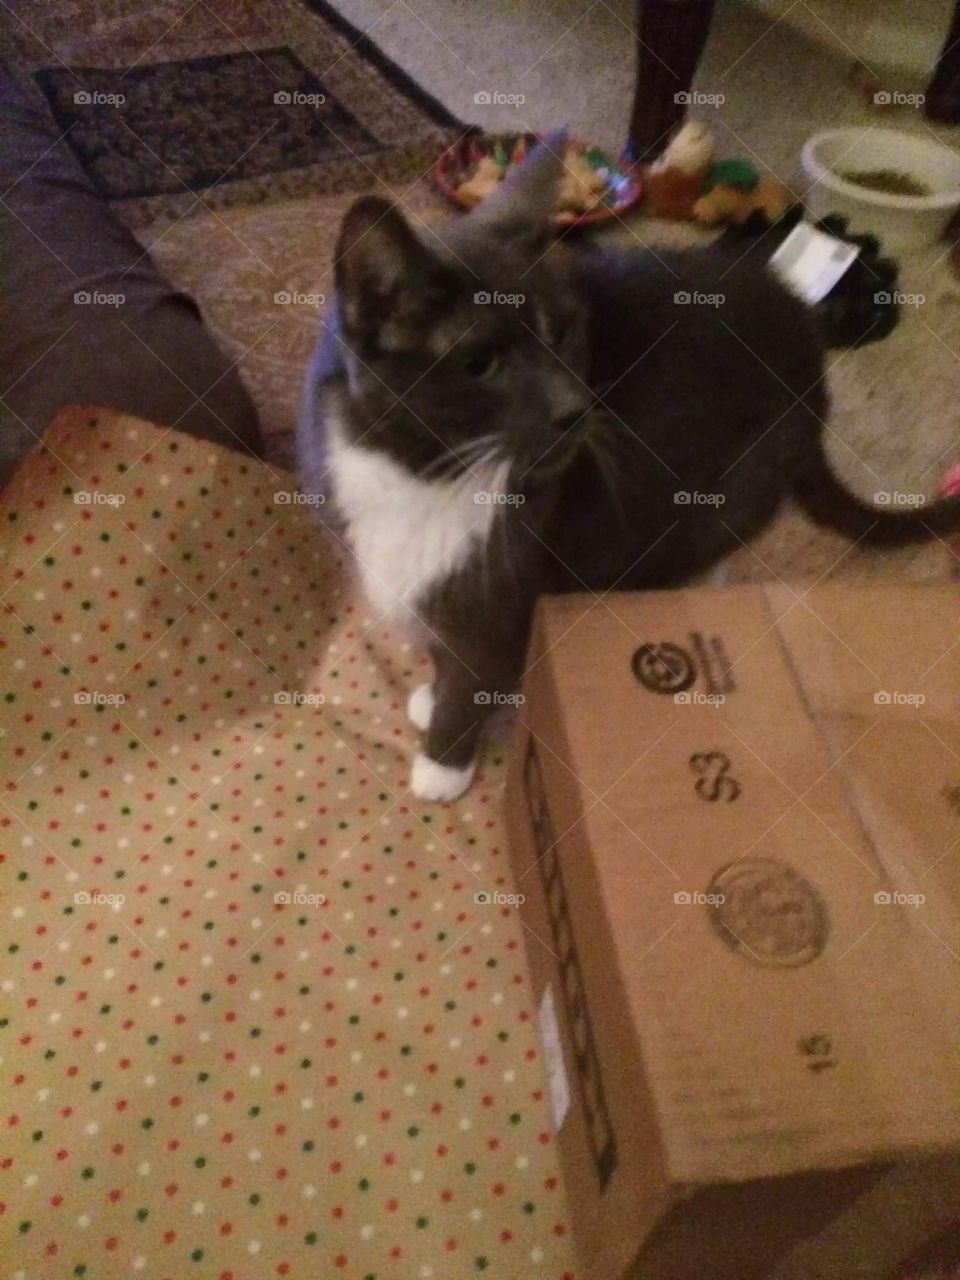 Every time I take out the wrapping paper....